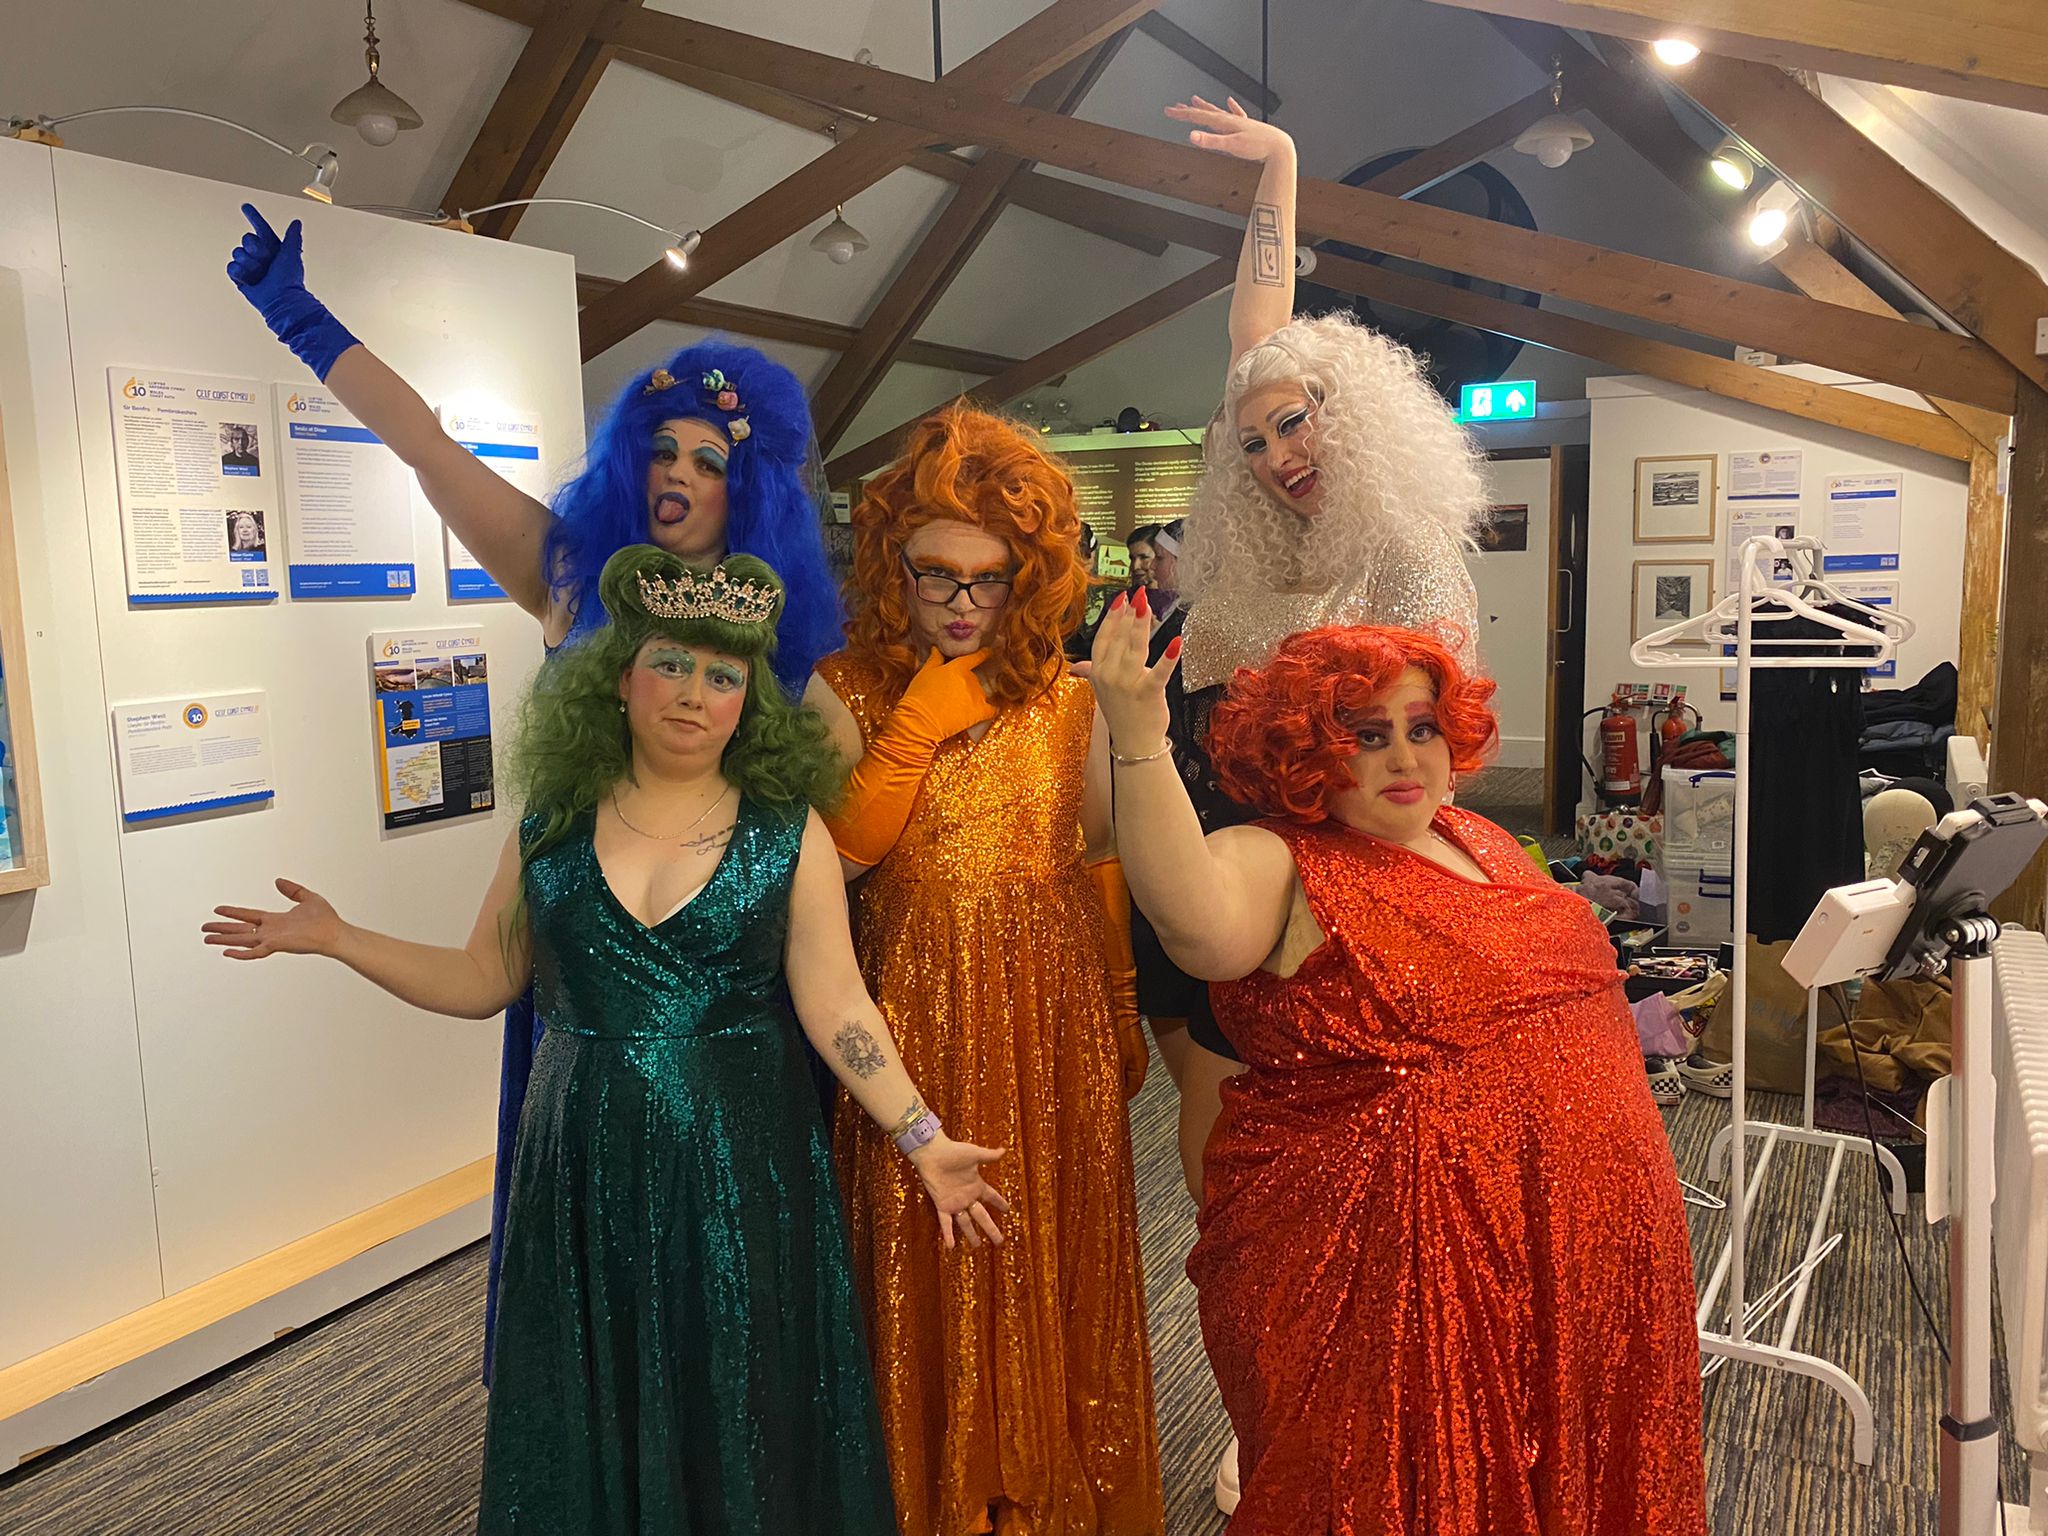 Members of the house of deviant in drag outfits made from different coloured sequin gowns, with matching coloured wigs.